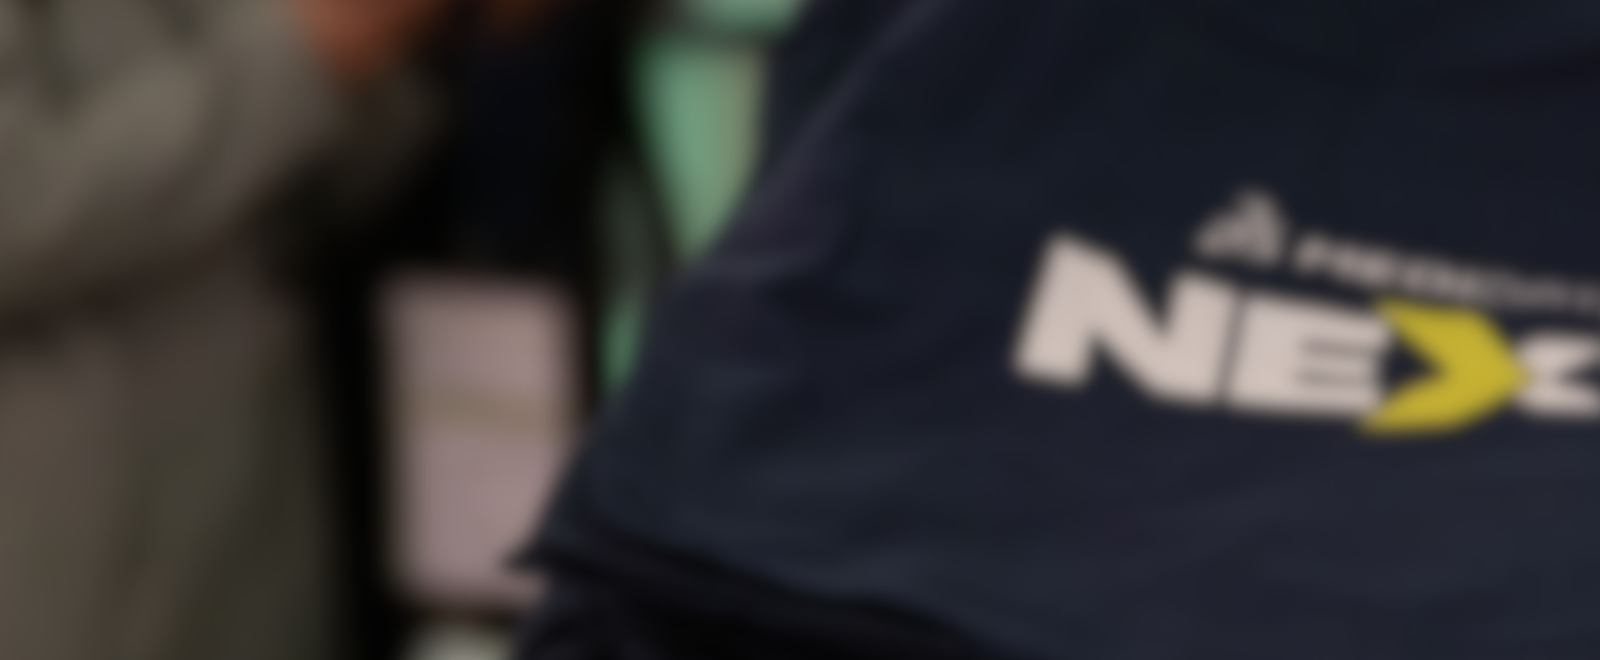 A blurred image of navy blue tote bags